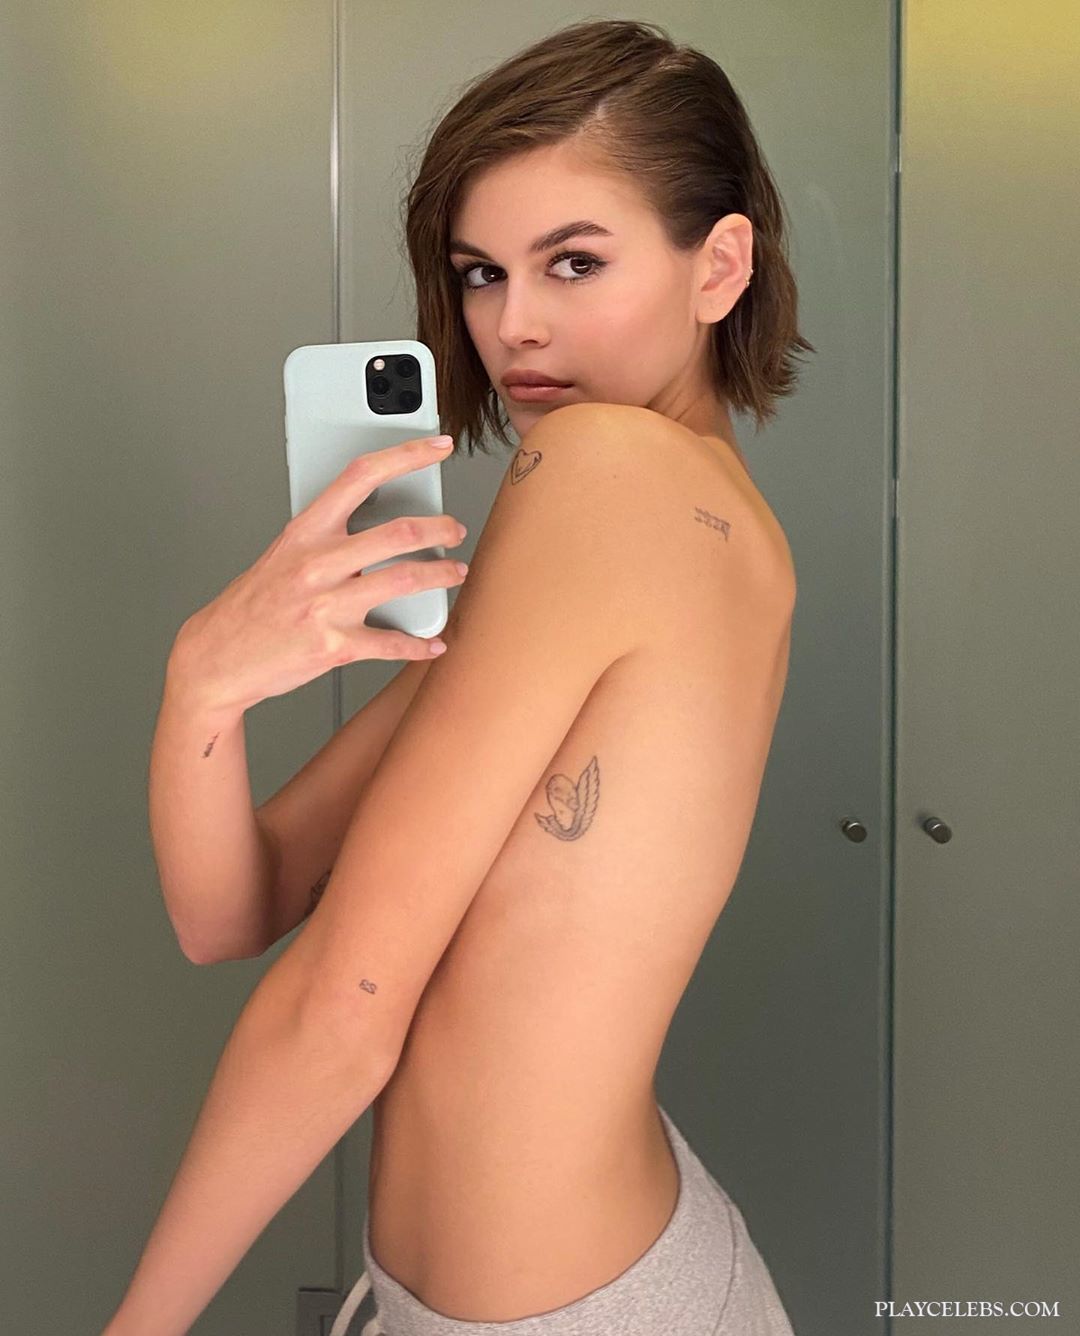 You are currently viewing Kaia Gerber Nude And Upskirt Photos